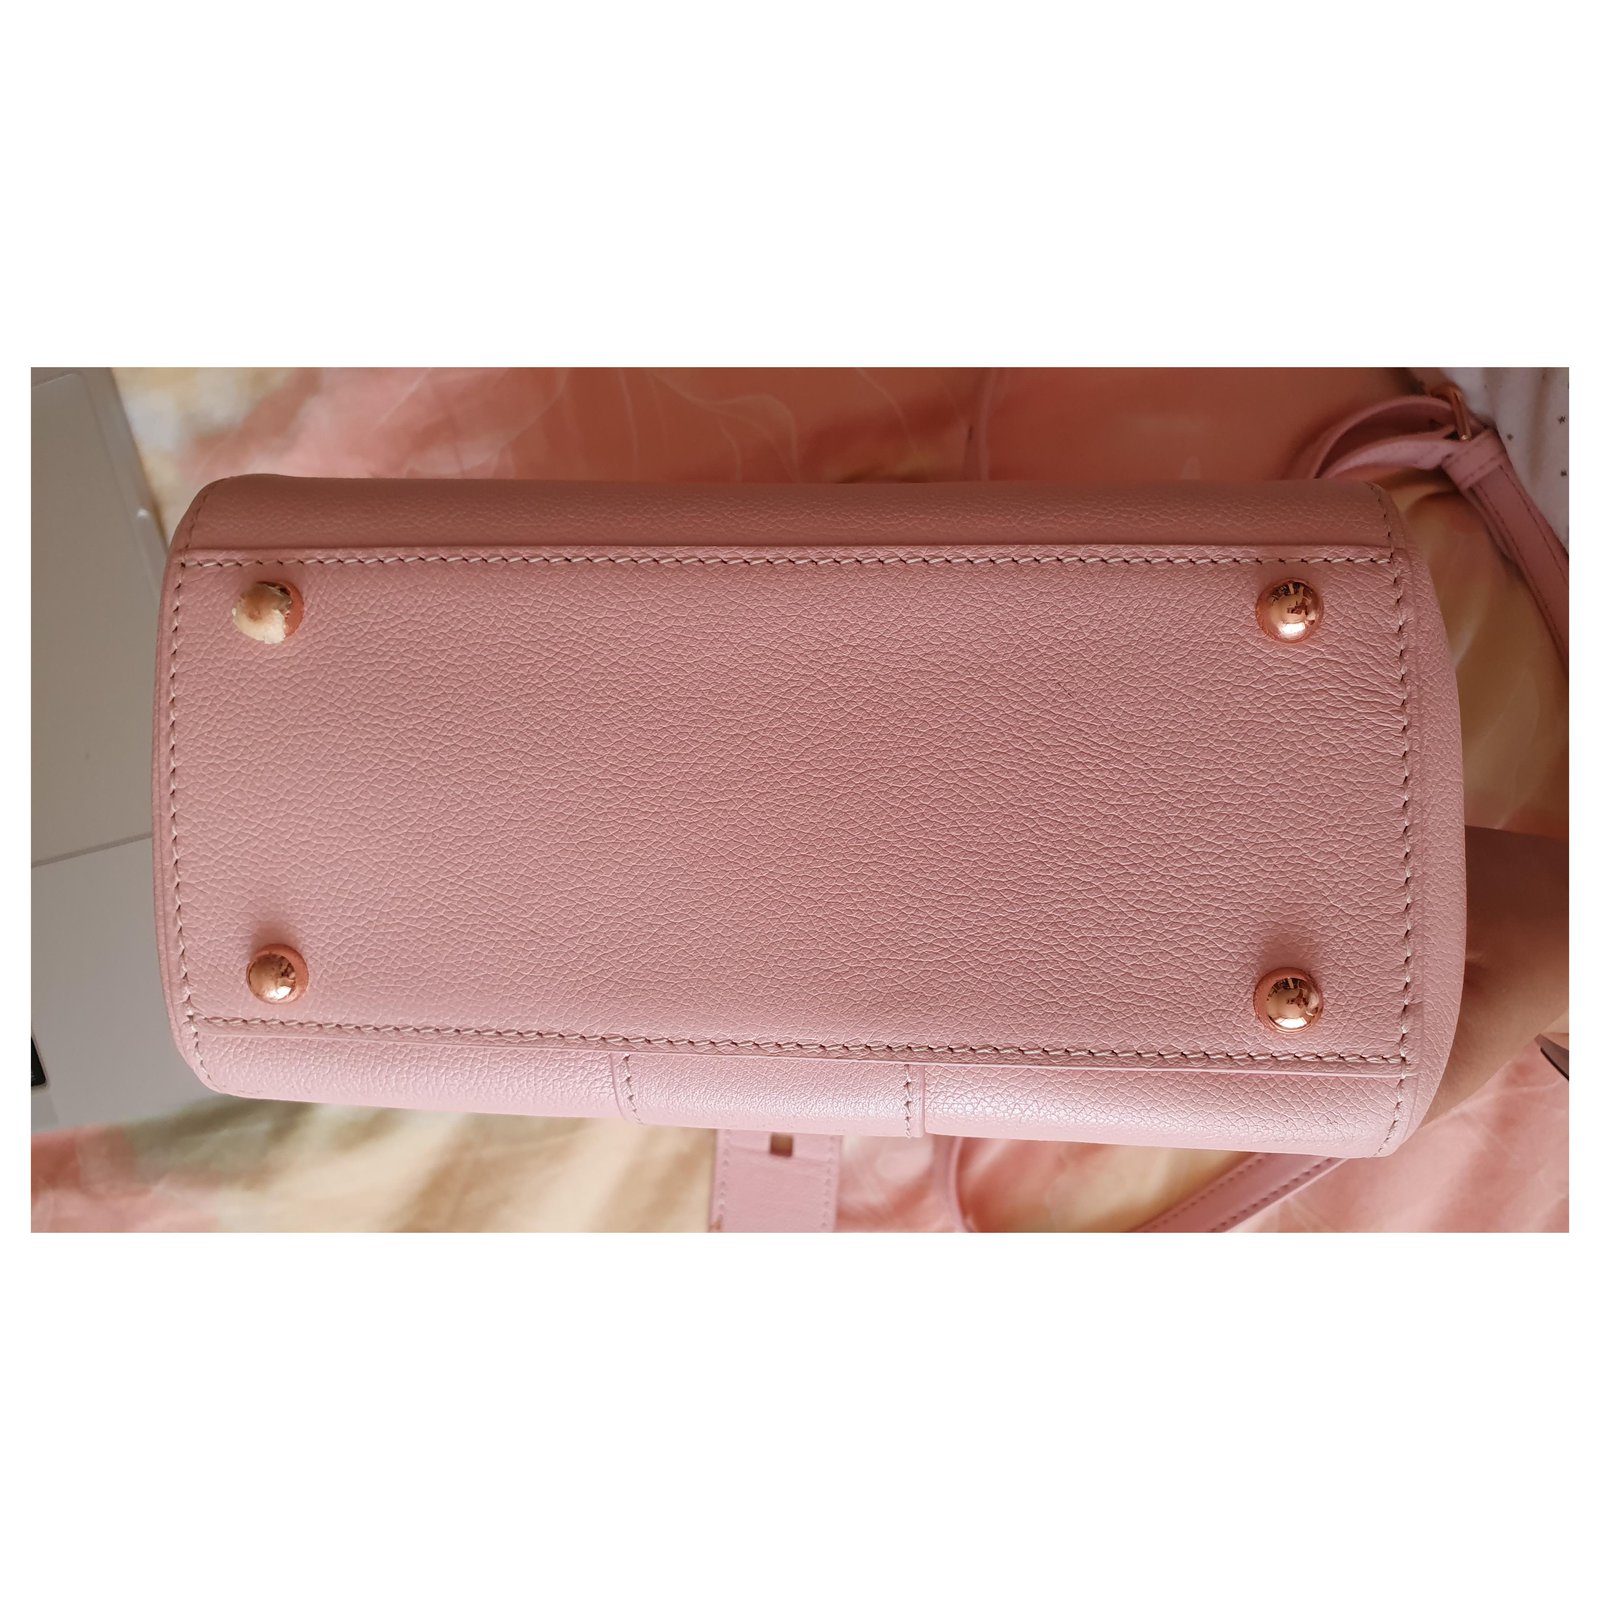 Delvaux - Authenticated Brillant Handbag - Leather Pink Plain for Women, Very Good Condition